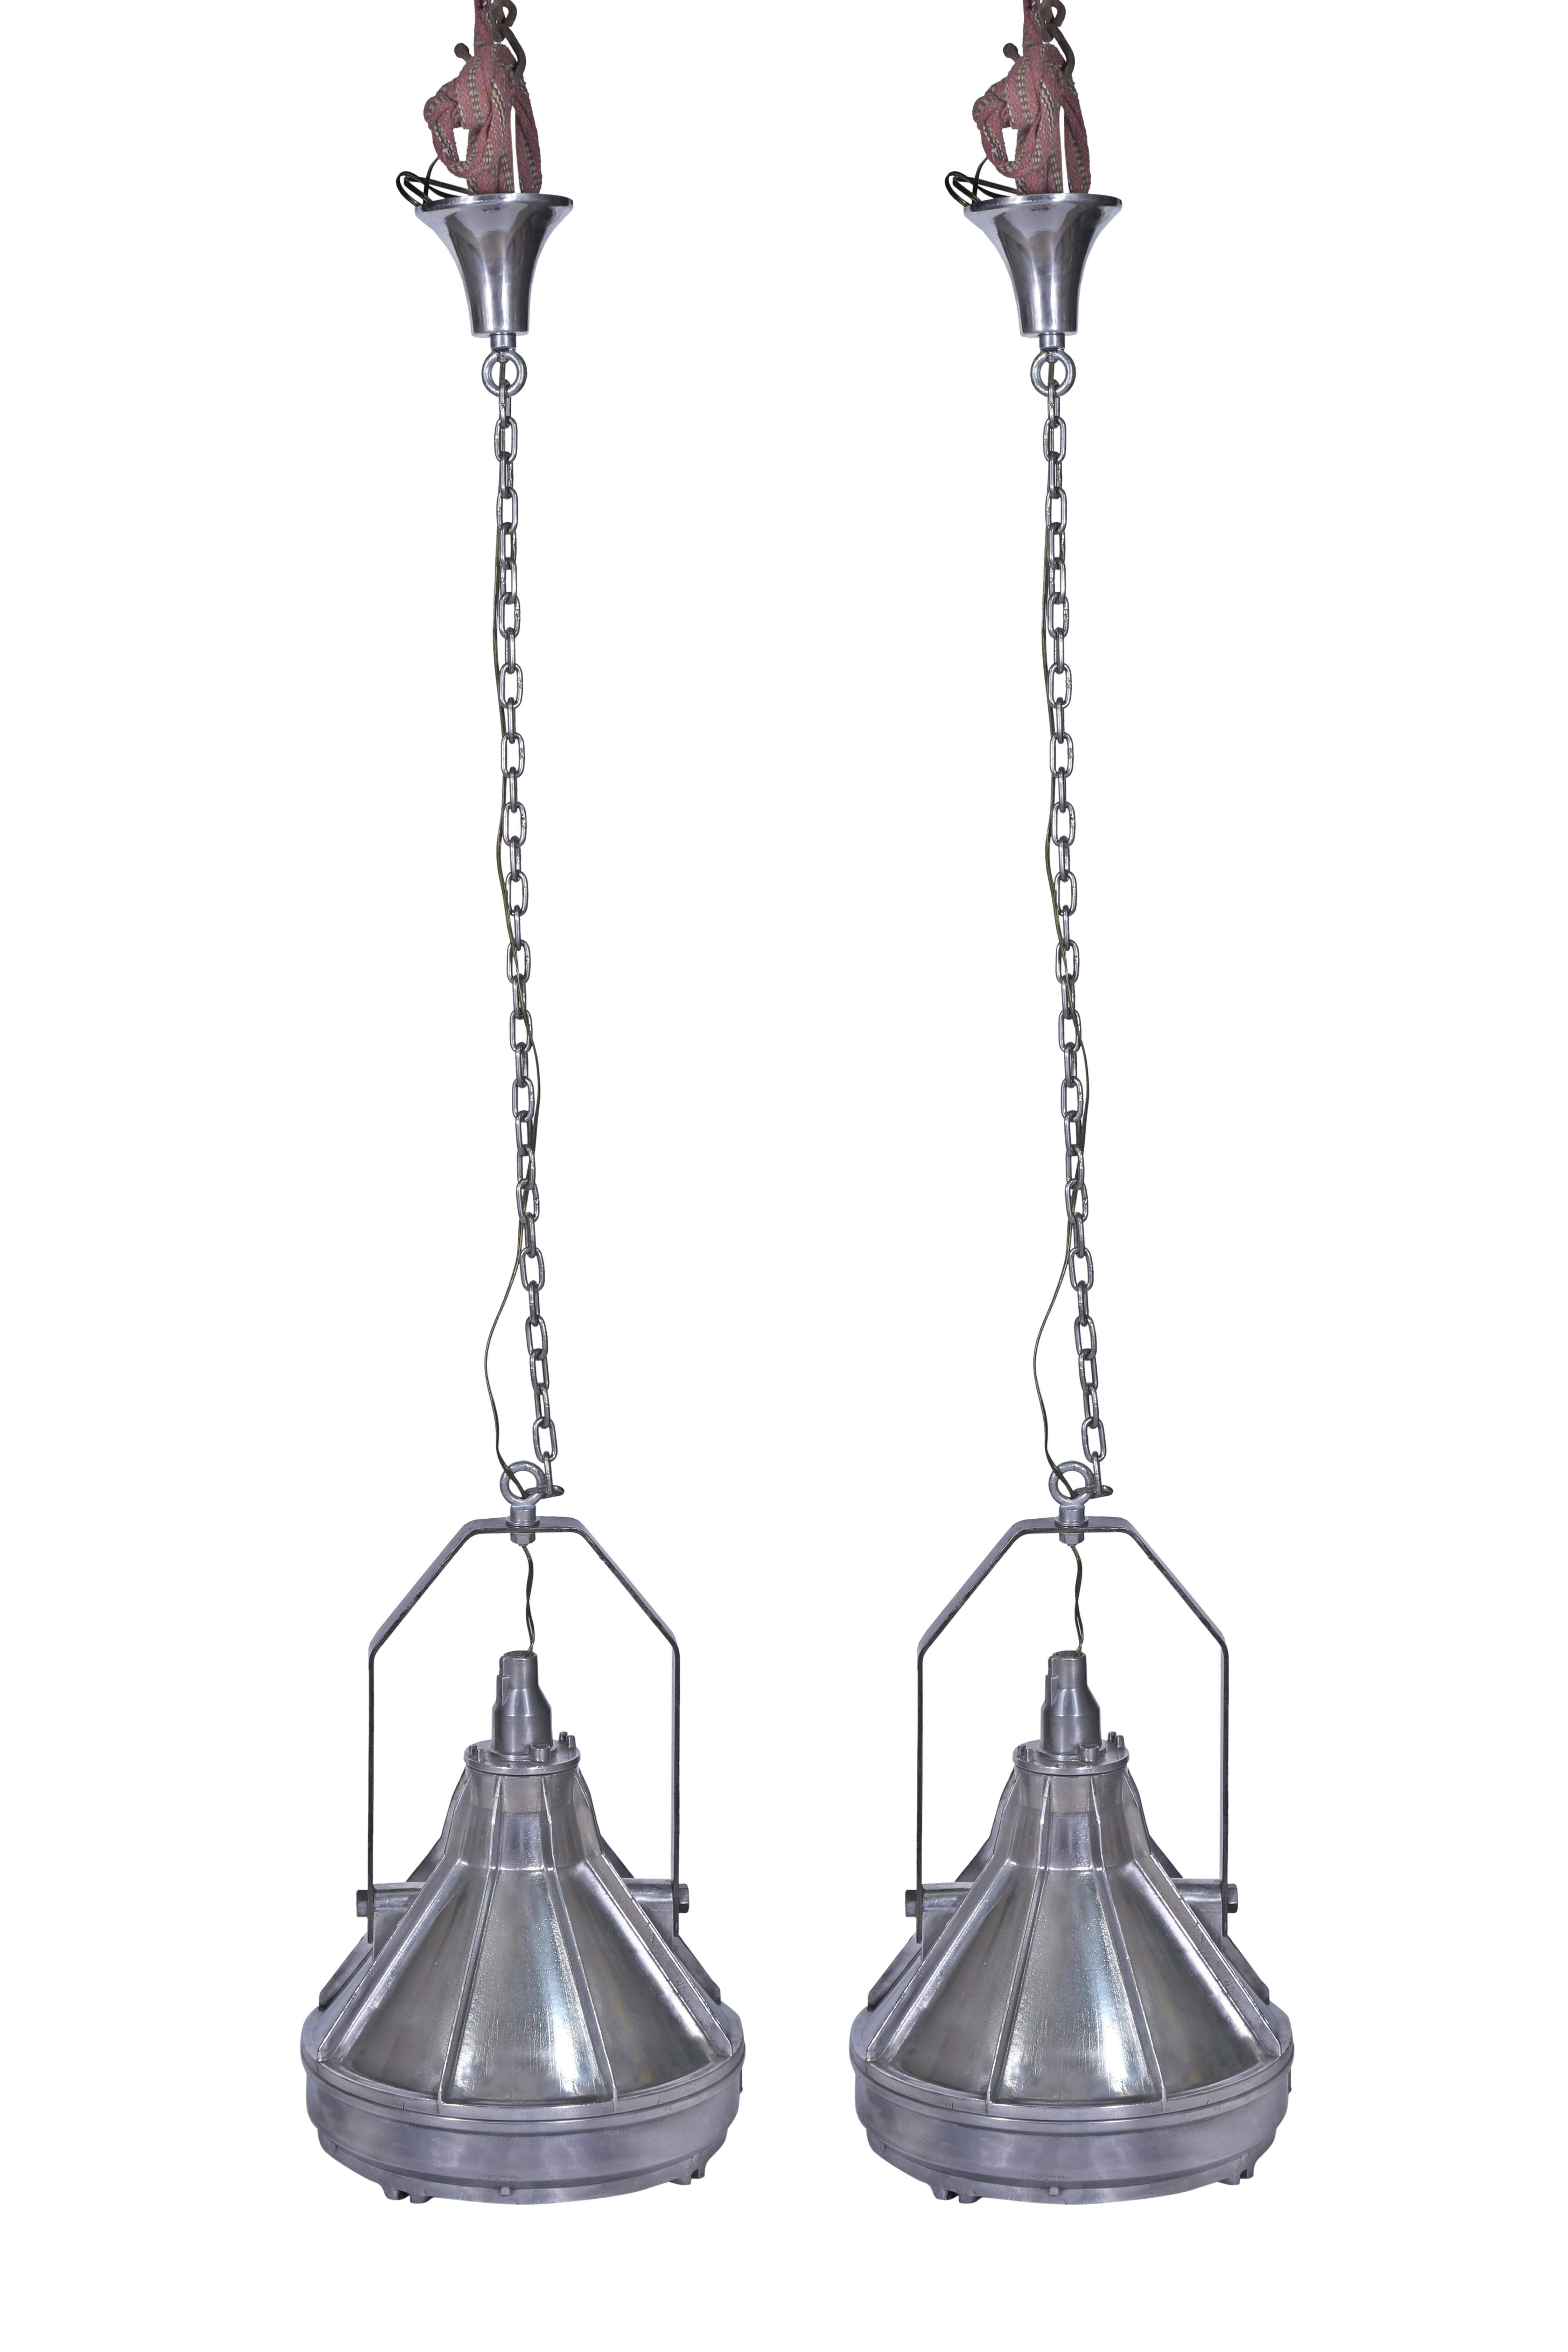 A large and stunning pair of pendant lights which were originally deck lights on a ship.  These have a great chrome patina and have a nice tapered shape with a fin-line texture down the sides.  These have been rewired for American use and takes a